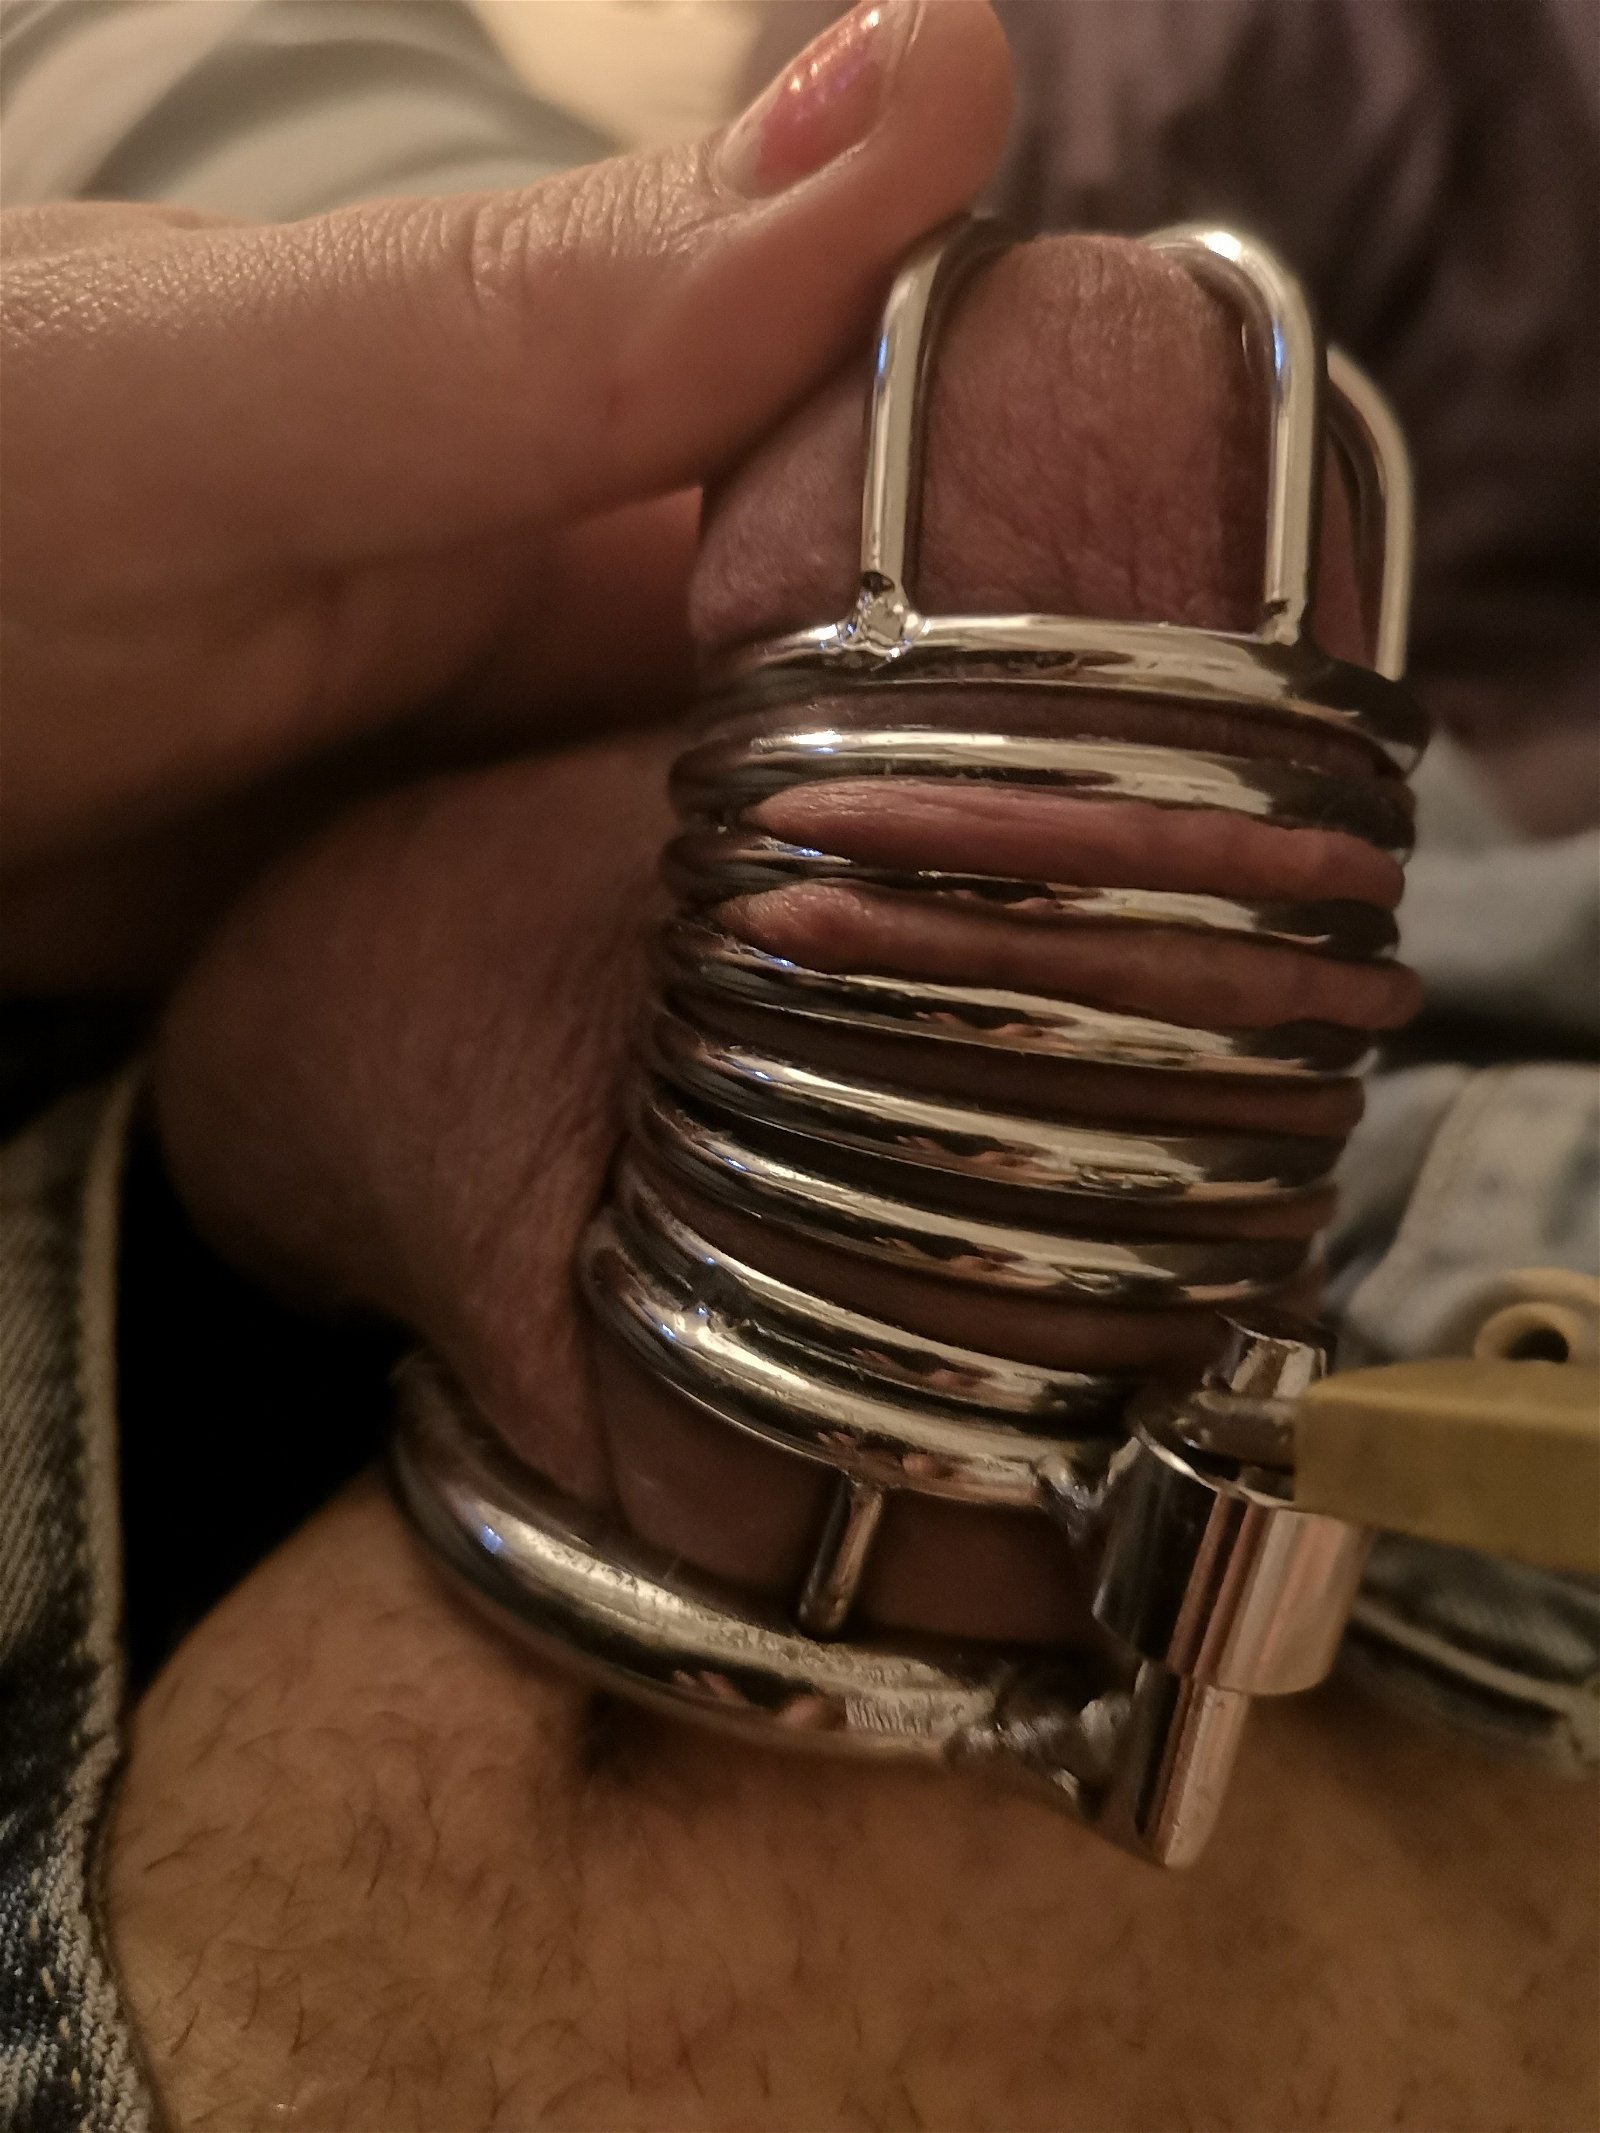 Photo by Dreamcream626 with the username @Dreamcream626, who is a star user,  March 14, 2020 at 12:16 AM. The post is about the topic Cuckold Chastity and the text says 'Hey Dreamiz just posted a new Free video come watch it is time to tease my slave until he almost blow out of his steel cage!

Video-->www.manyvids.com/Video/1791954/cuckold-chastity-tease/

And thank you so much for the love and support you give me it..'